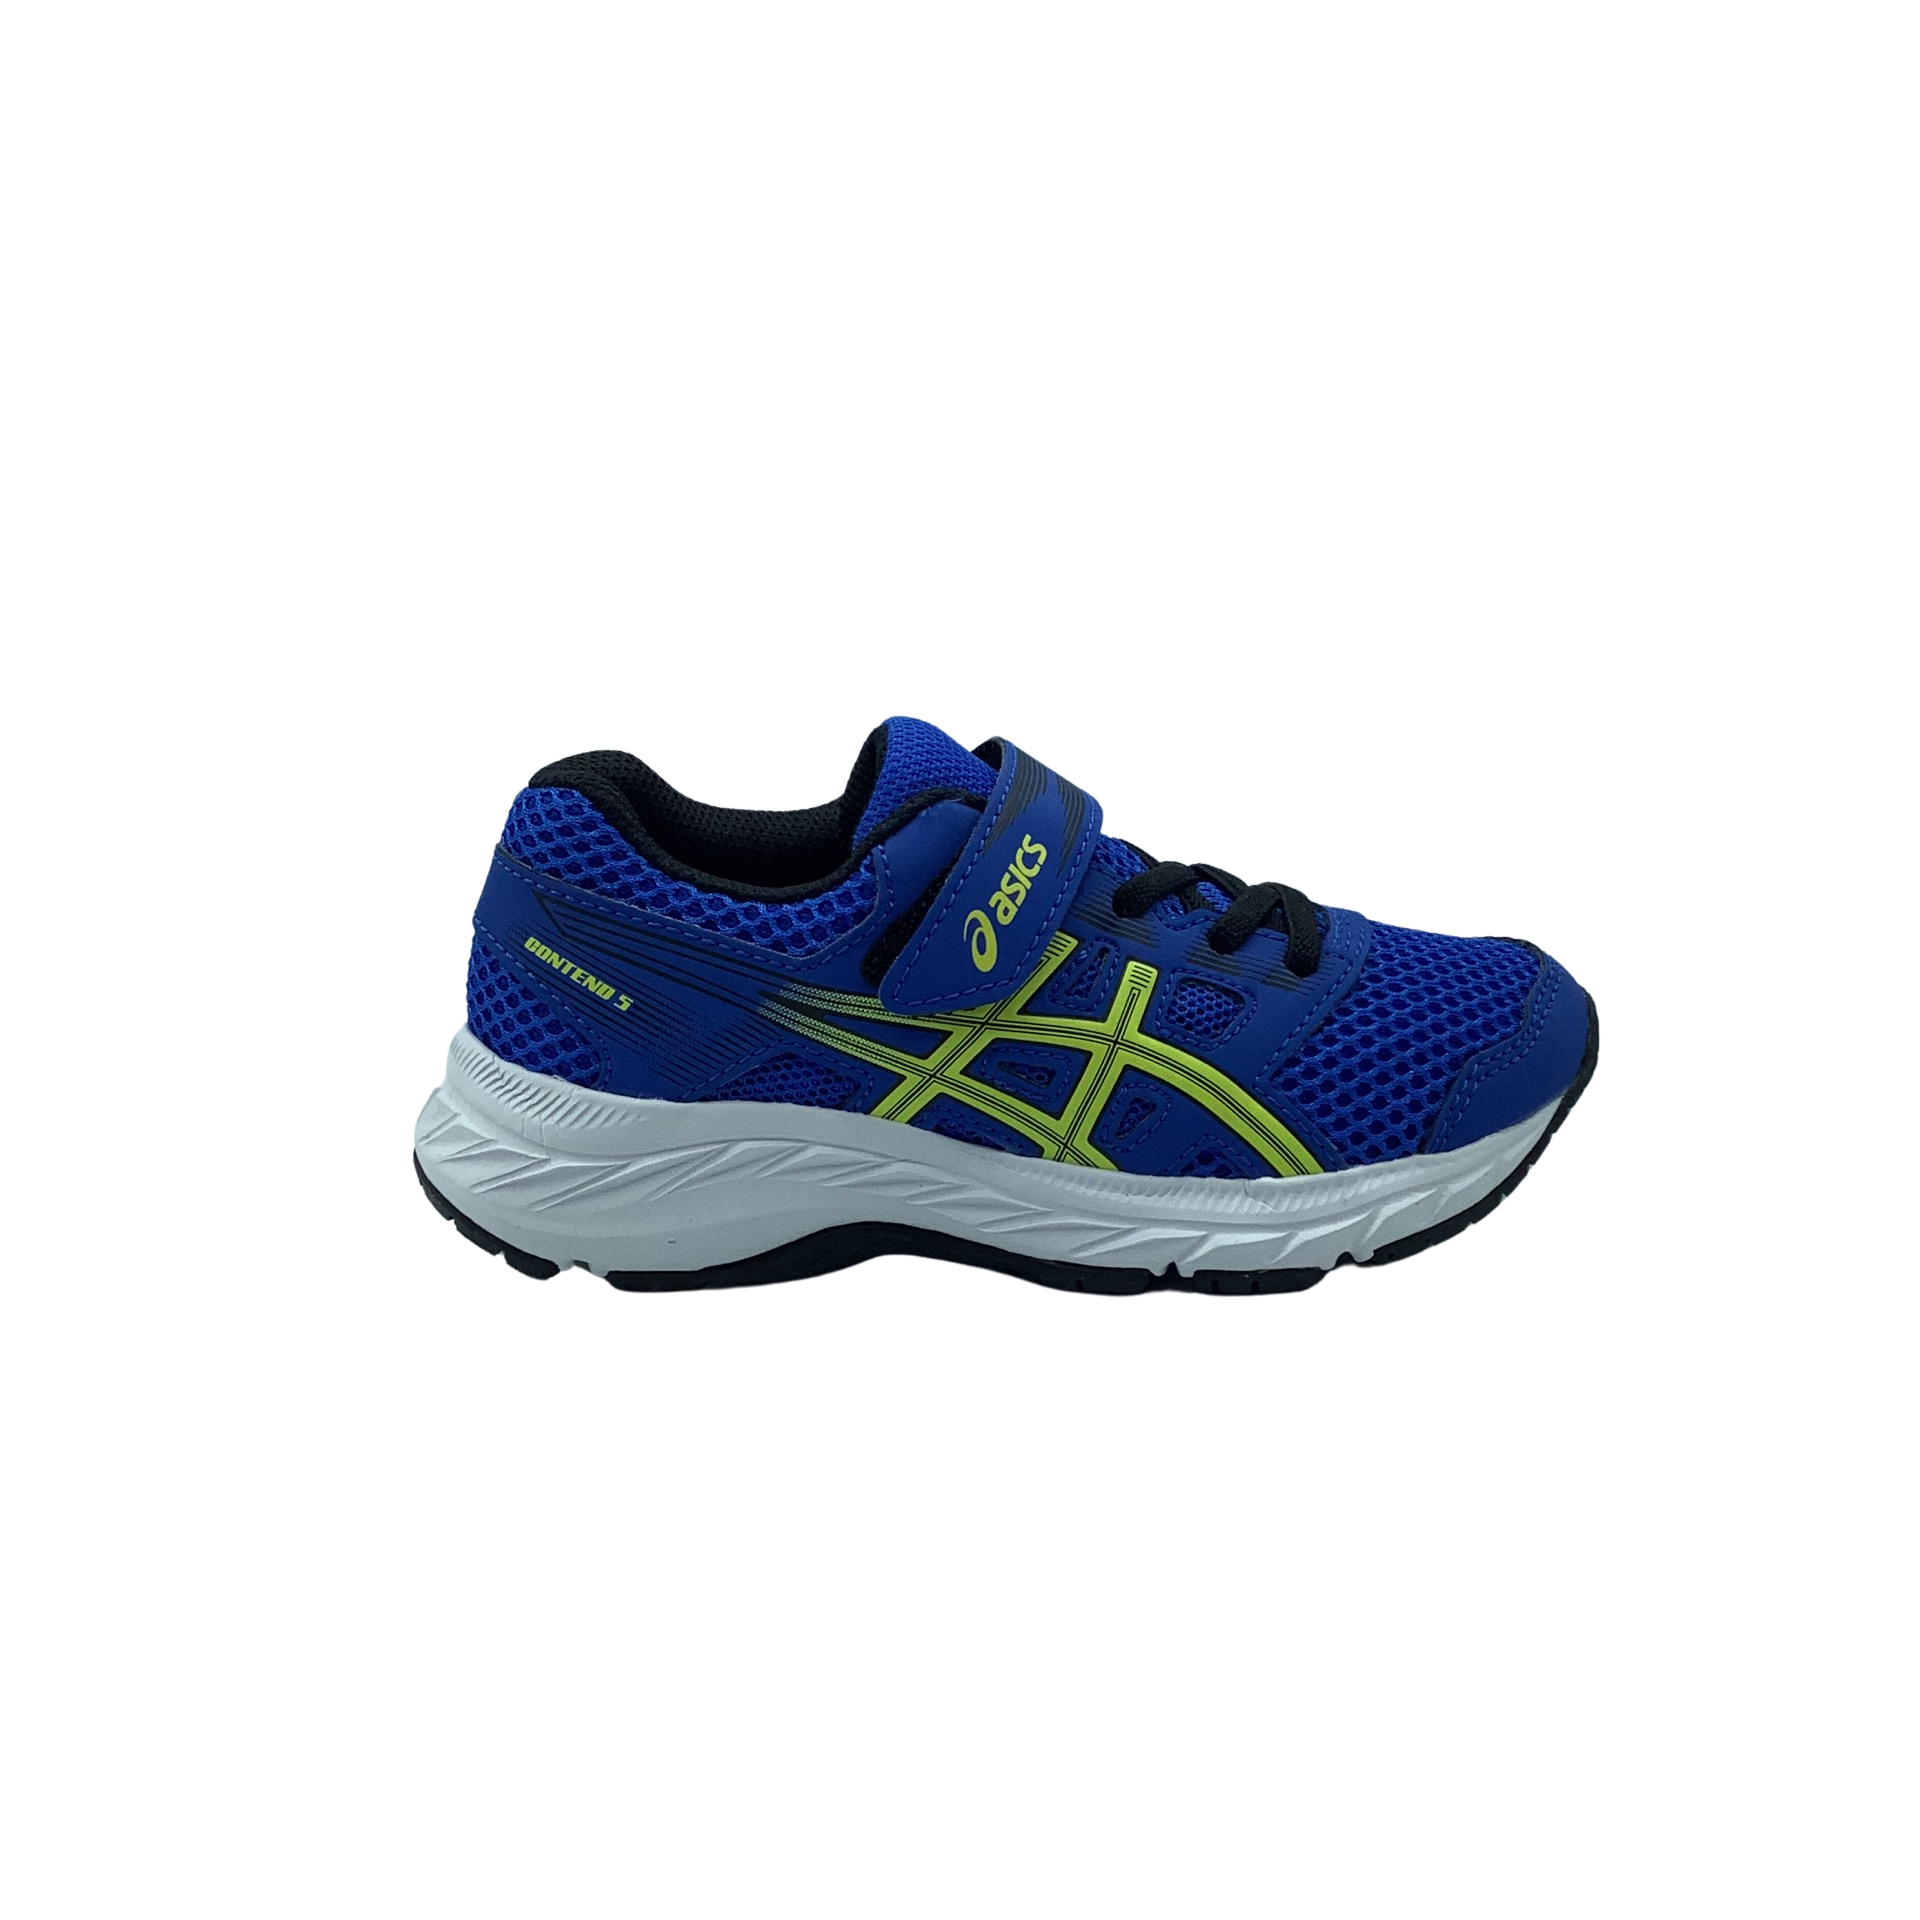 Asics CONTEND PS – Sports Uptown